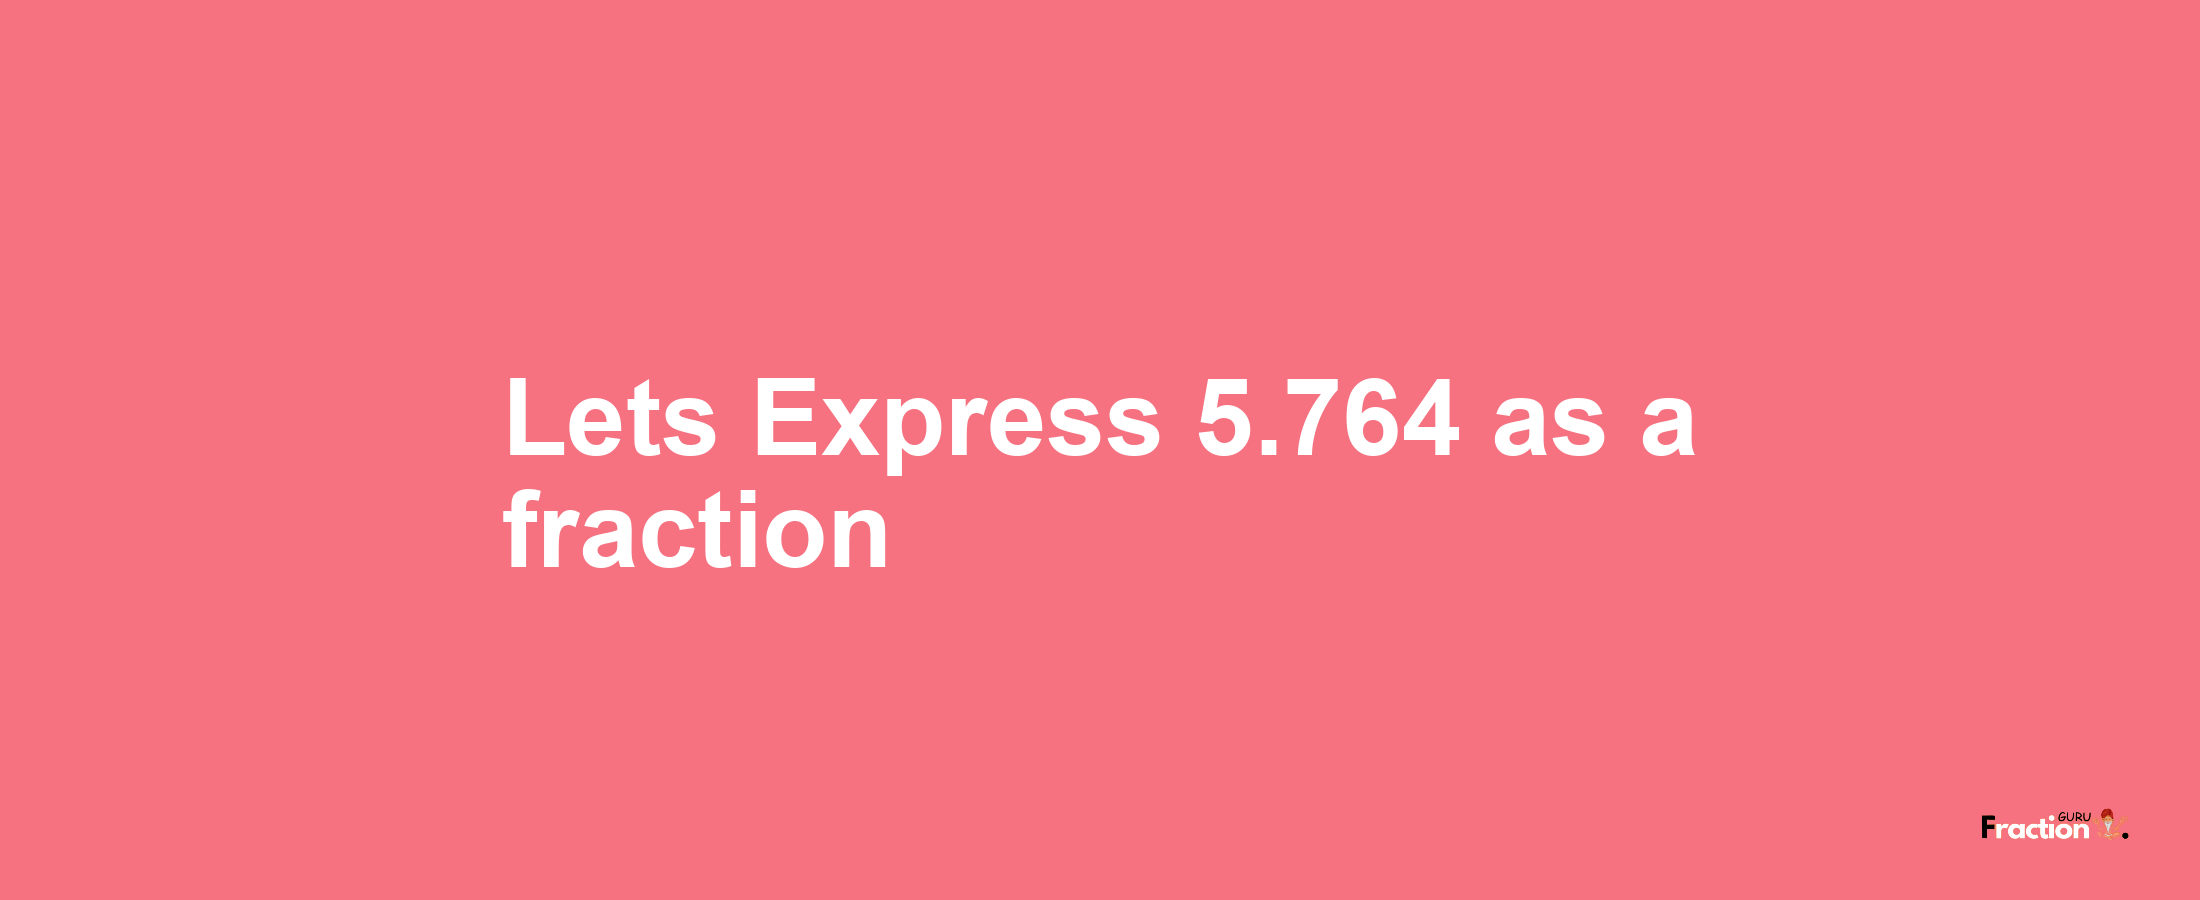 Lets Express 5.764 as afraction